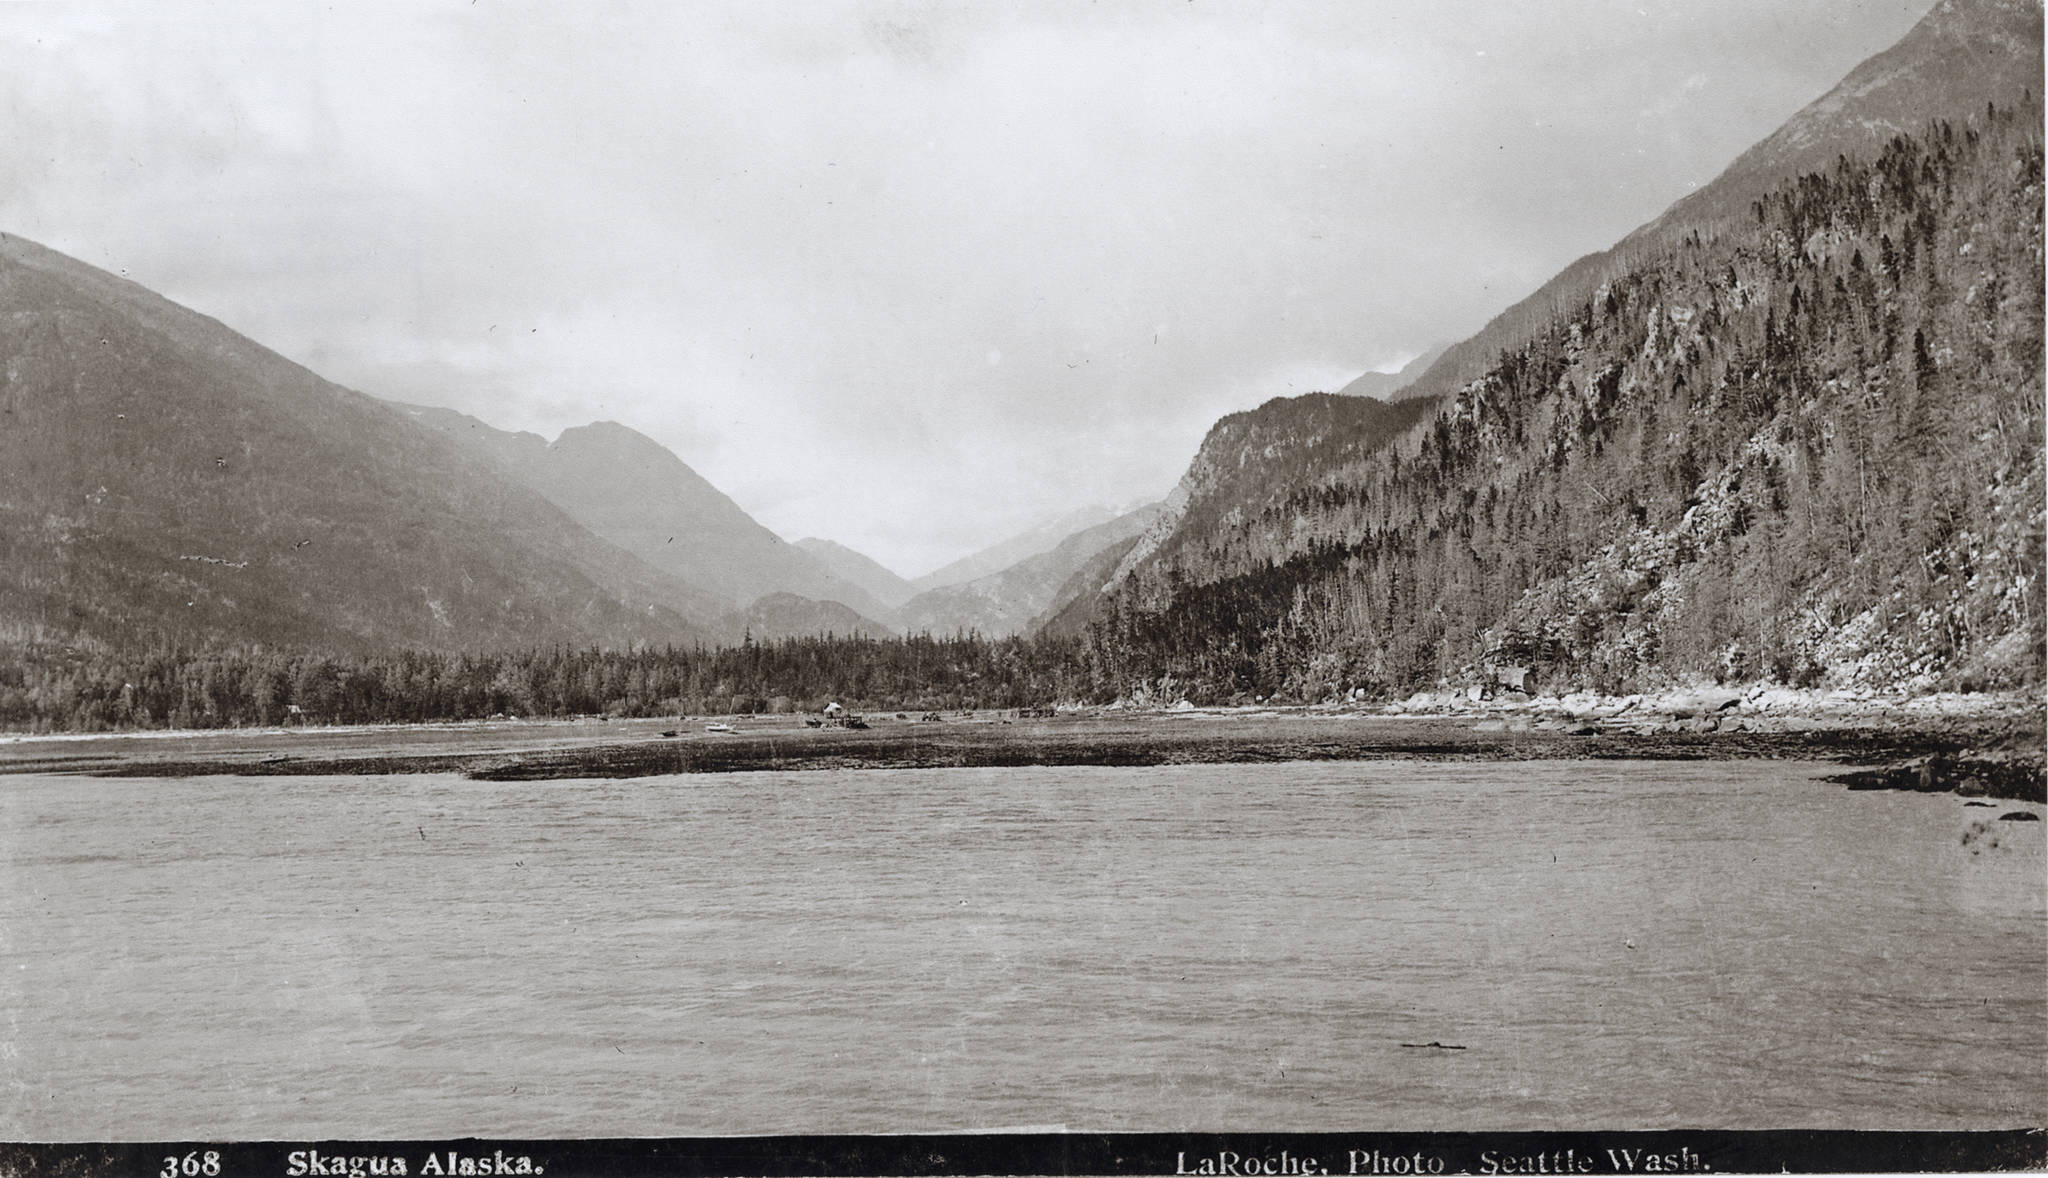 This photograph of the Skagway valley was taken from the deck of the Steamer Queen on July 26, 1897 and shows the almost undisturbed terrain of the Skagway Valley just before the Klondike Gold Rush begins for Skagway. This is Mooresville, Captain Moore’s name for his little hamlet. In the next few hours, days, weeks, and months, the gold seeking Argonauts will invade the valley like an army with their outfits, tents and animals. In less than a month, a street grid will be laid out. The tents of the first month will quickly give way to wood buildings, one, two, and three stories high and the population will increase from around two dozen or so to over 10,000 by the start of 1898. In the center of this image stand Captain William Moore’s Cabin from 1887 and in front, his son Ben Moore’s wood-frame house under construction. (Library of Congress, 3c22304u; KLGO SE-9-8799)